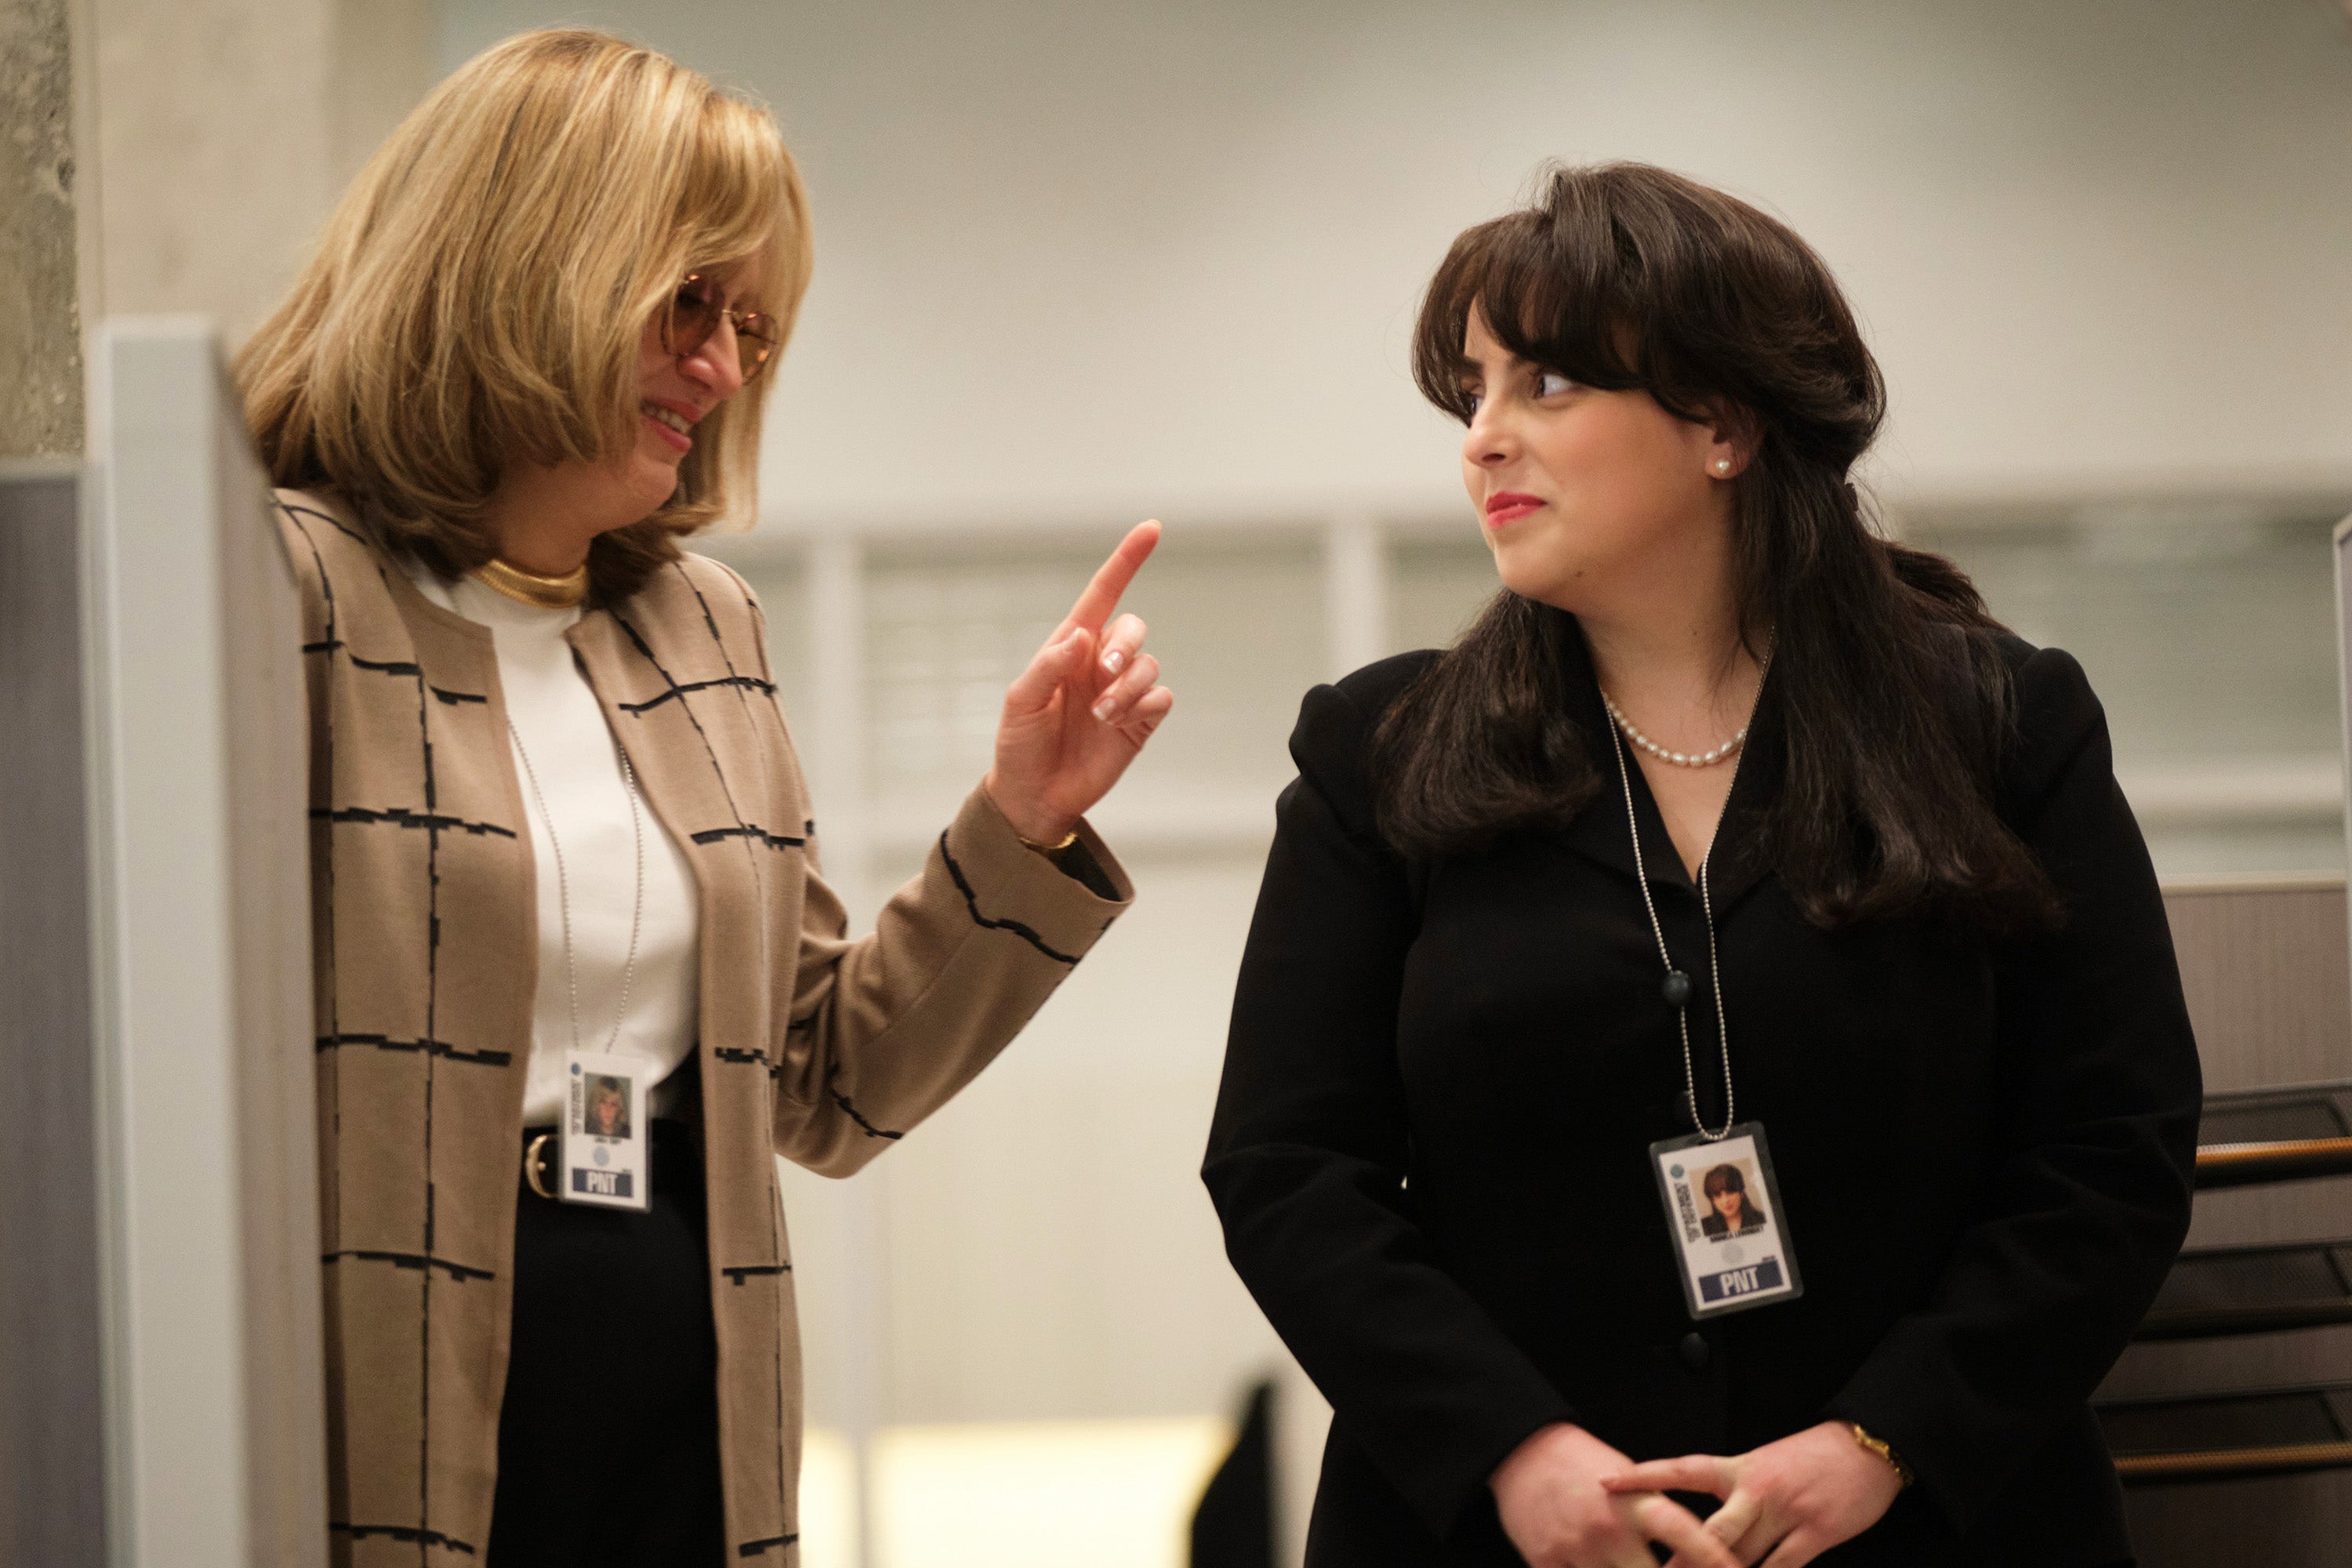 Sarah Paulson as Linda Tripp raises her left index finger at Beanie Feldstein as Monica Lewinsky as they stand together in an office, smiling collegially